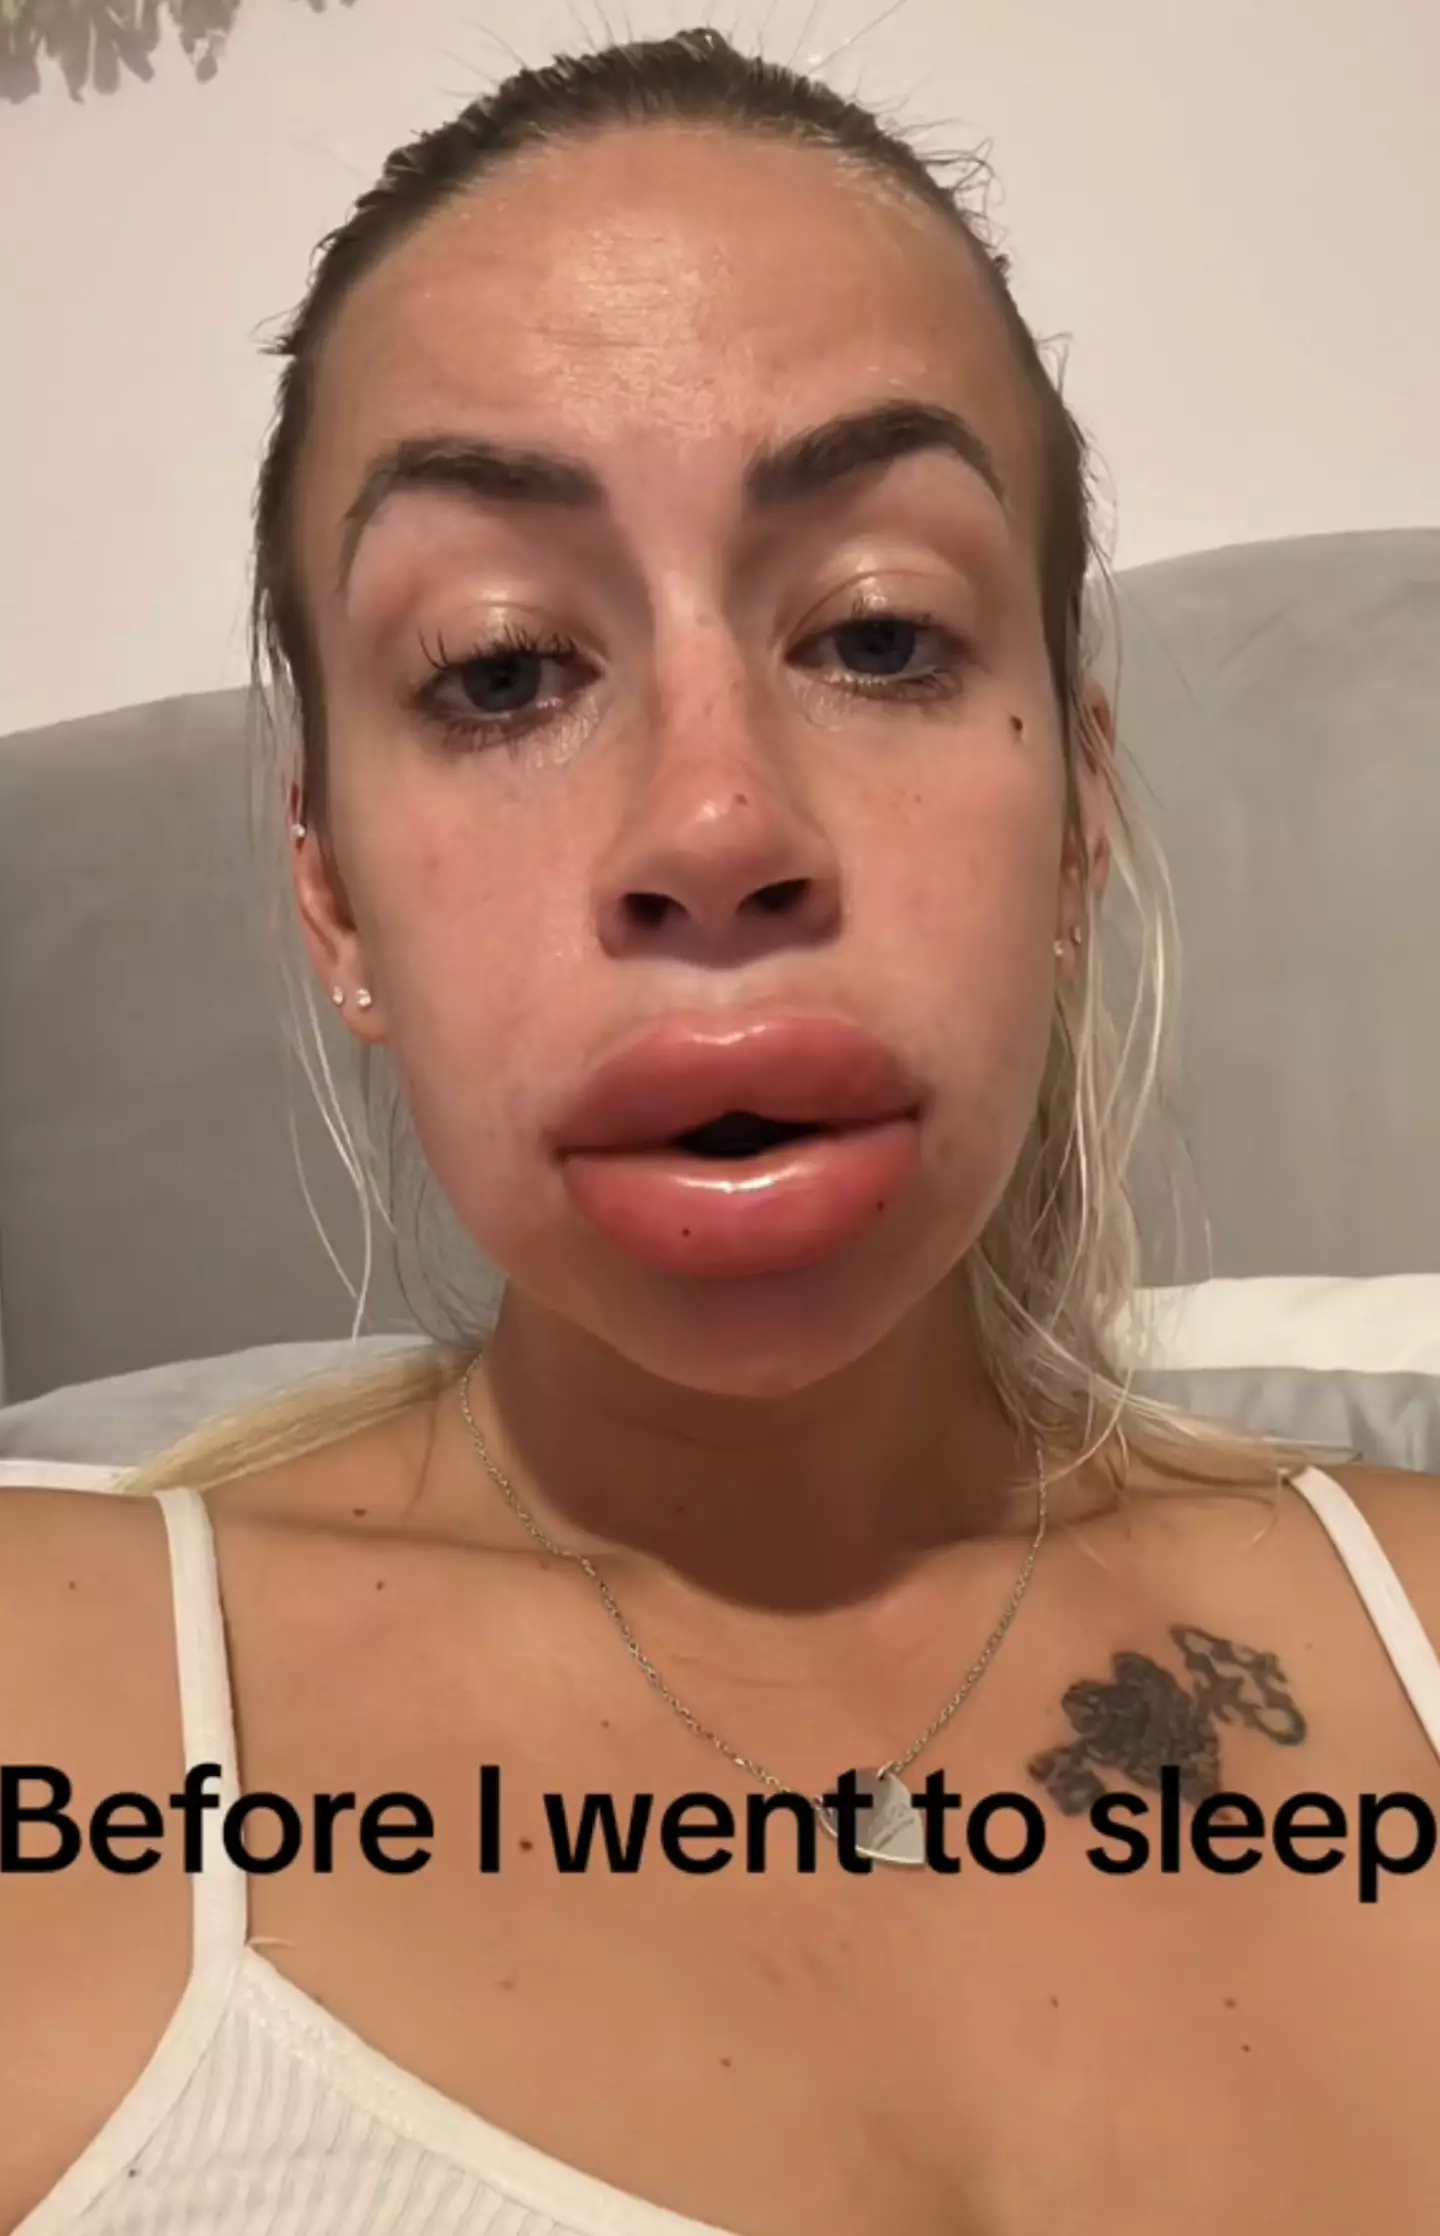 Courtney's lips continued to swell.